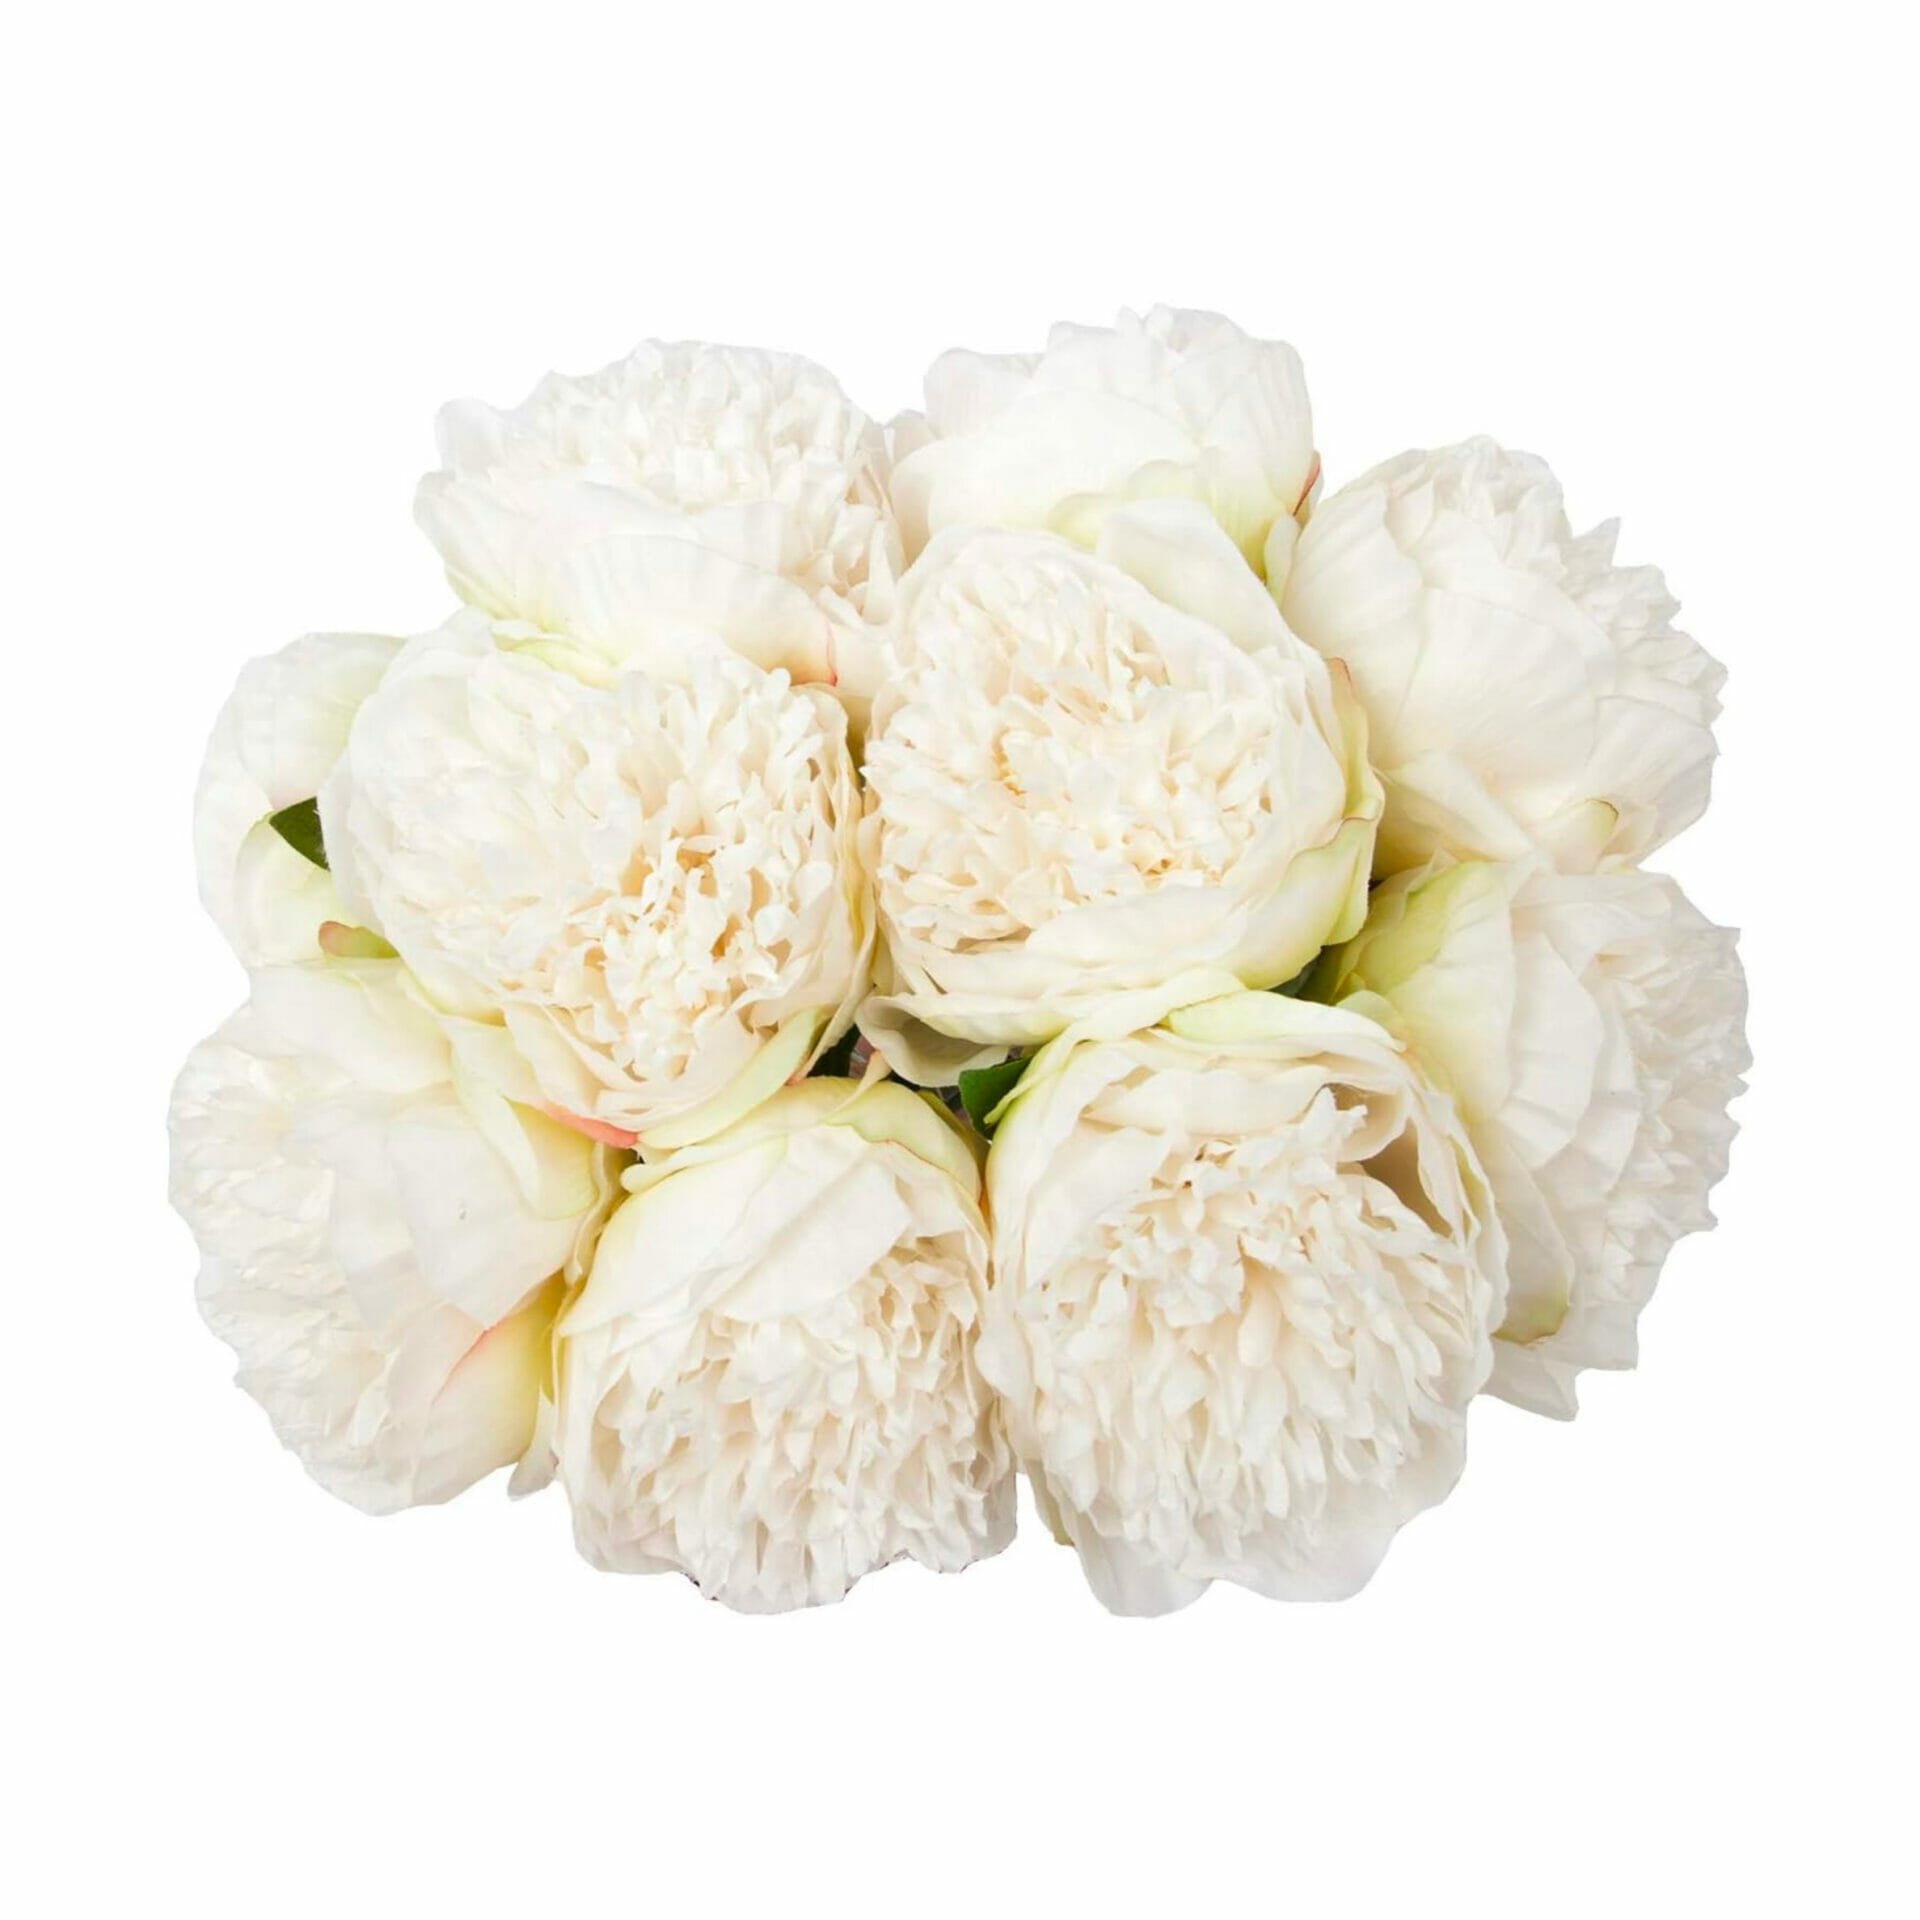 faux florals amazon peony peonies white stems flowers affordable budget friendly